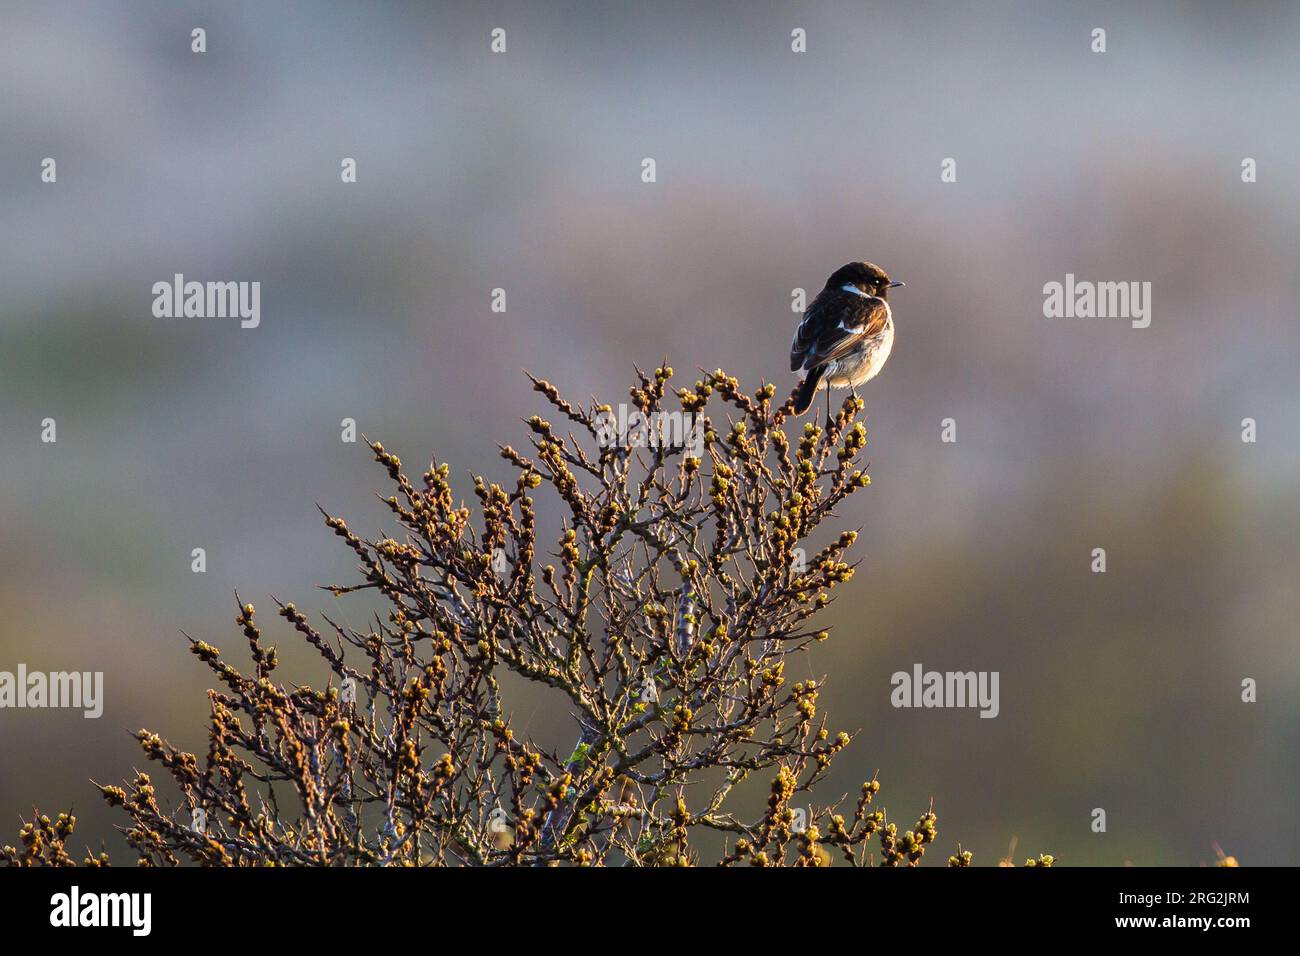 Roodborsttapuit, European Stonechat, Saxicola rubicola male perched on top of sea thorn in backlight Stock Photo